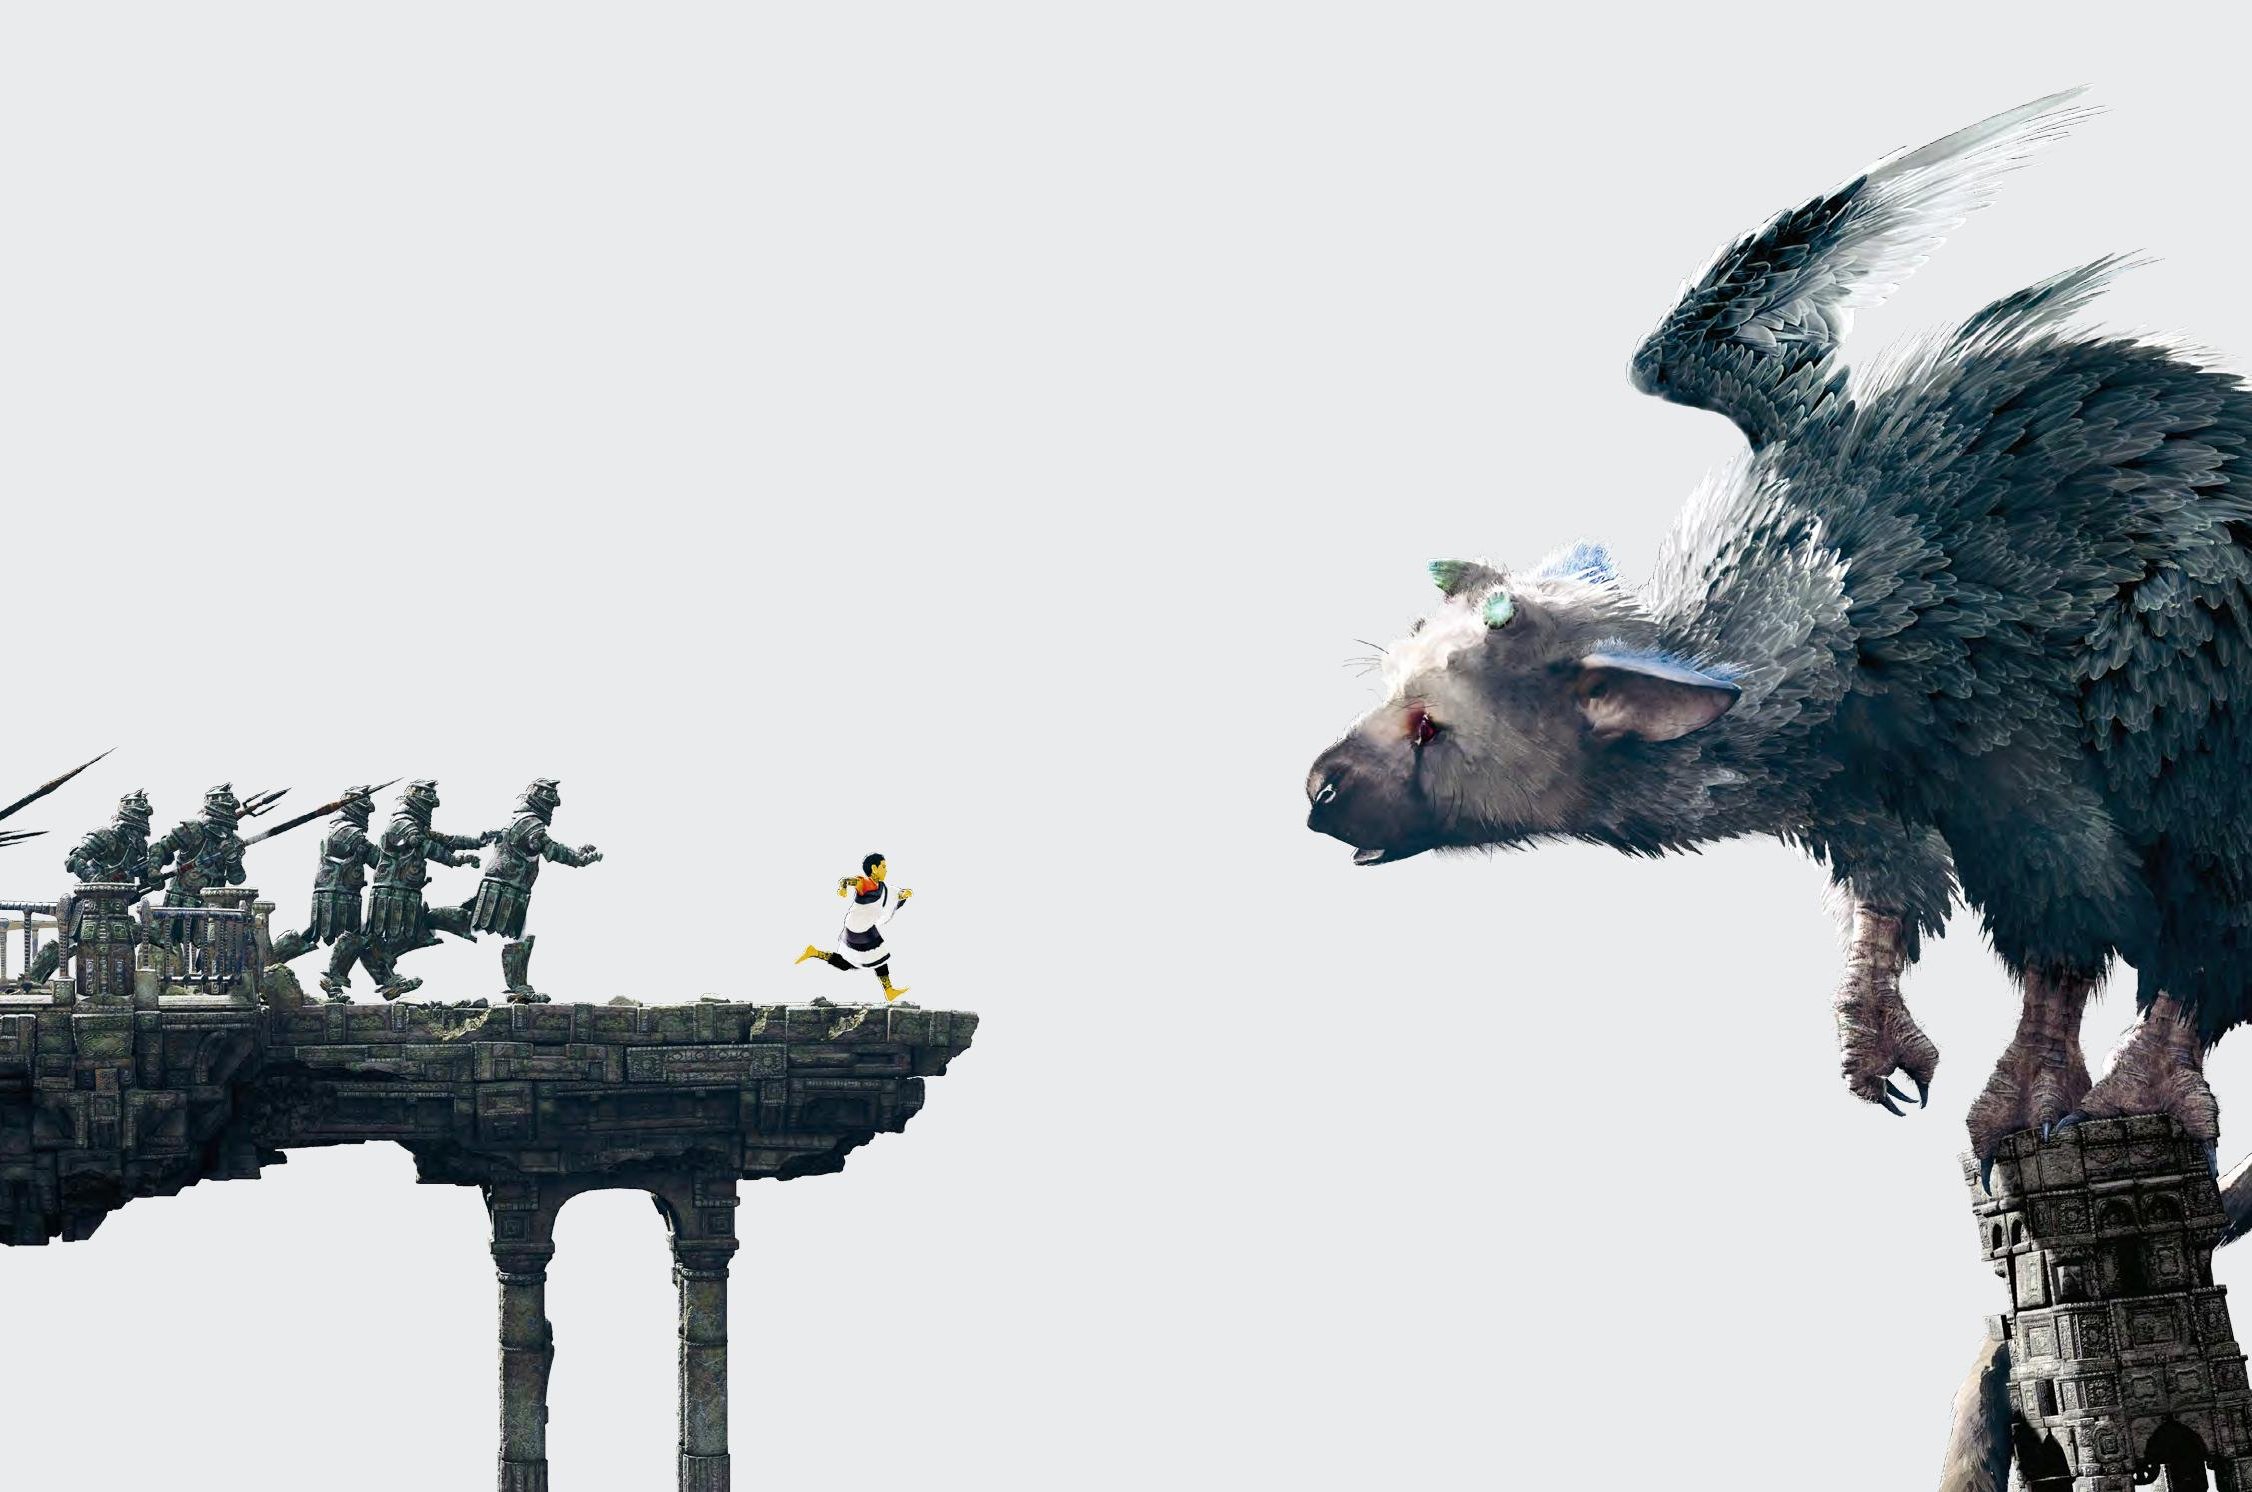 The Last Guardian: New Gameplay Details, 2016 Release Confirmed - IGN